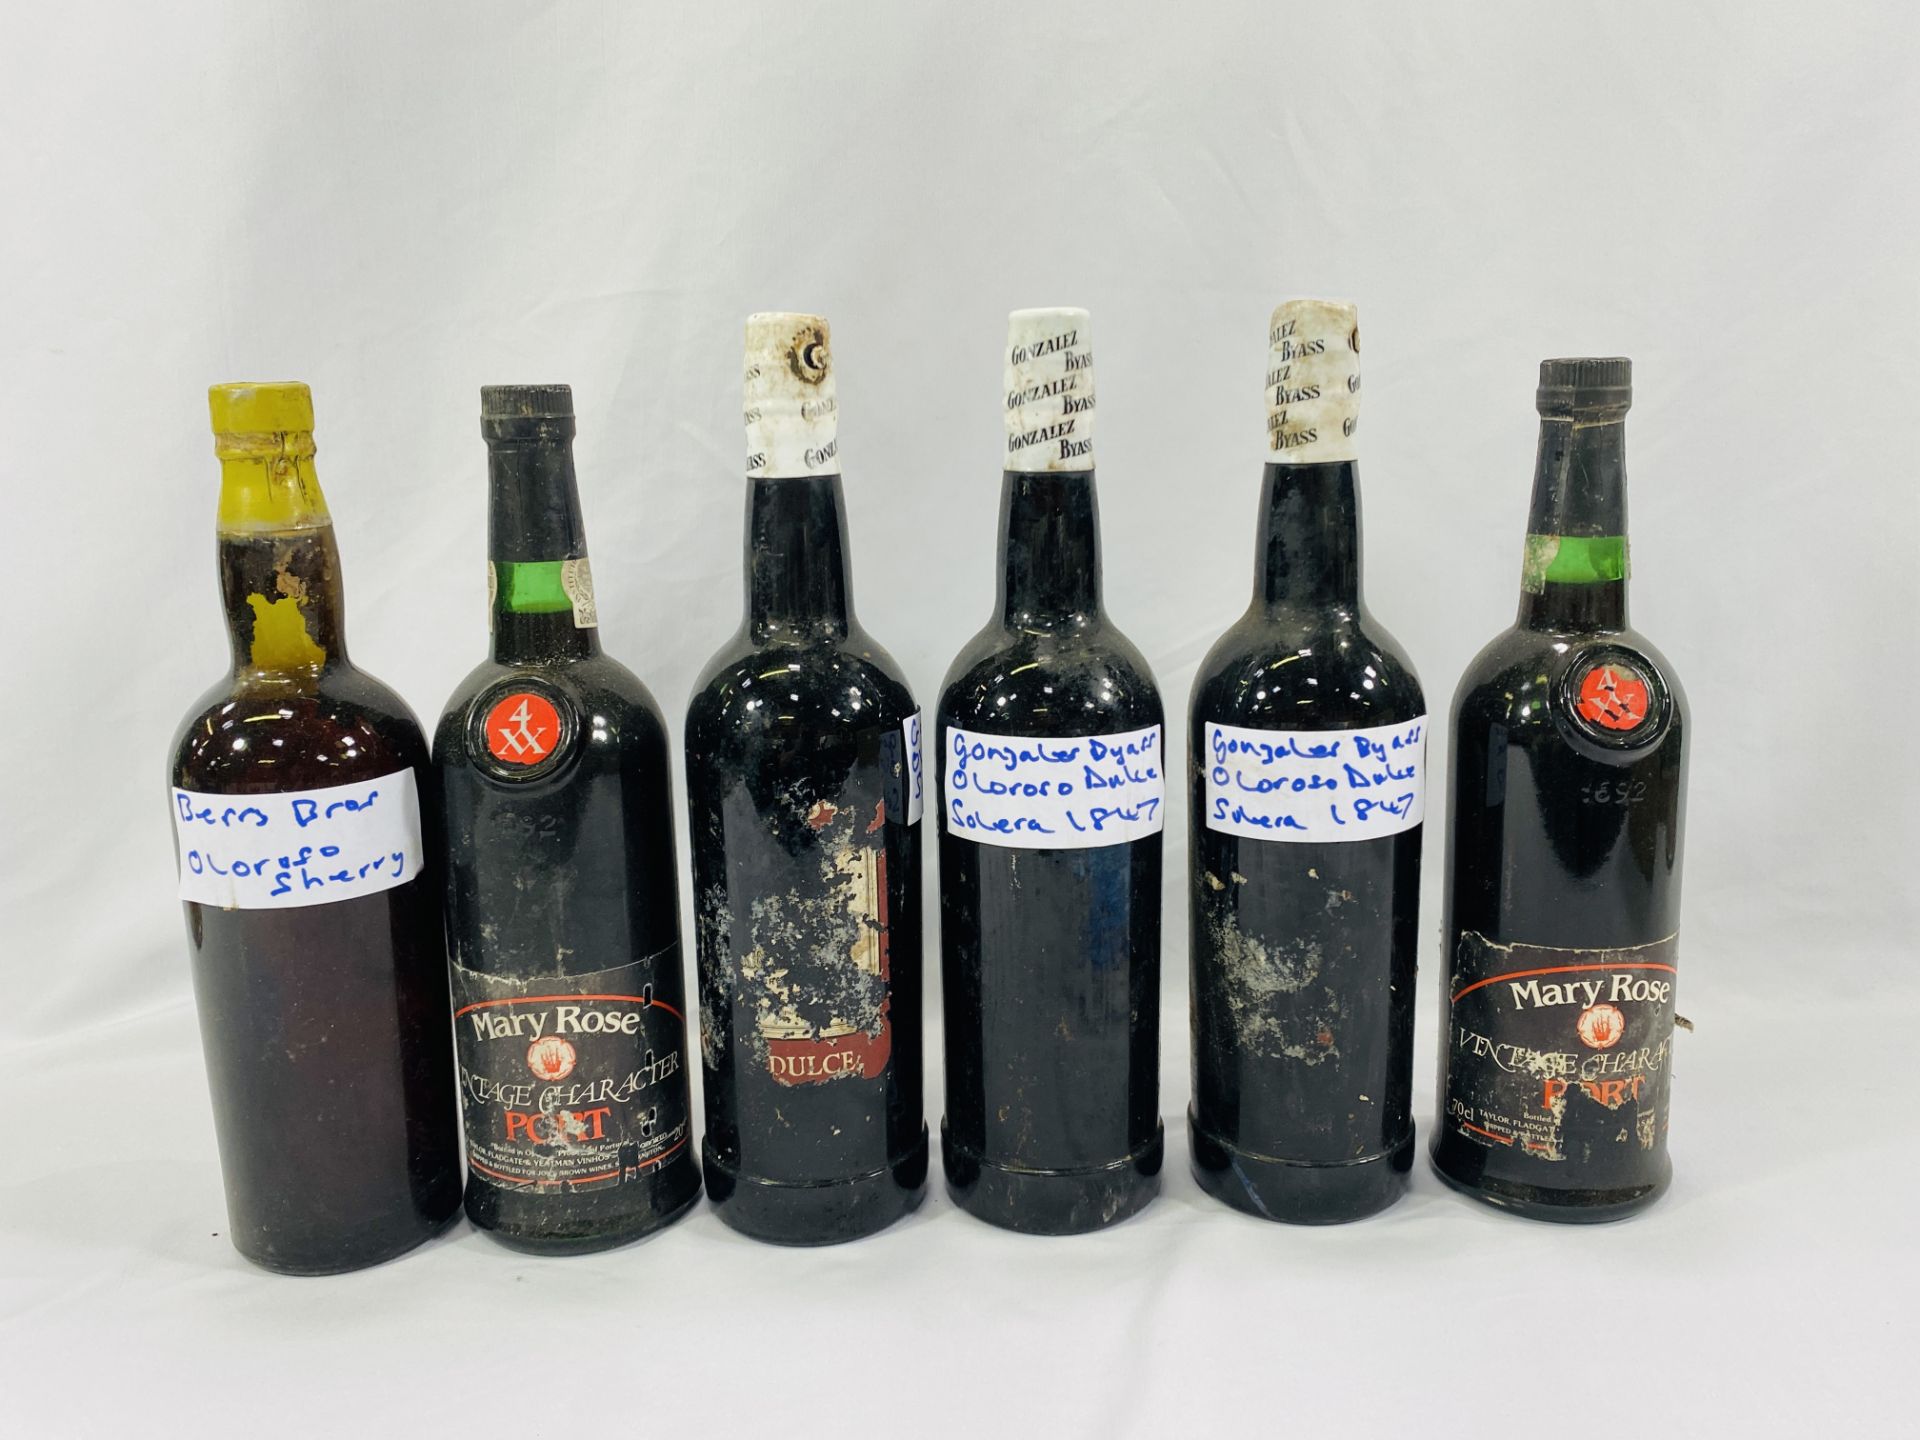 Four bottles of sherry and two of port